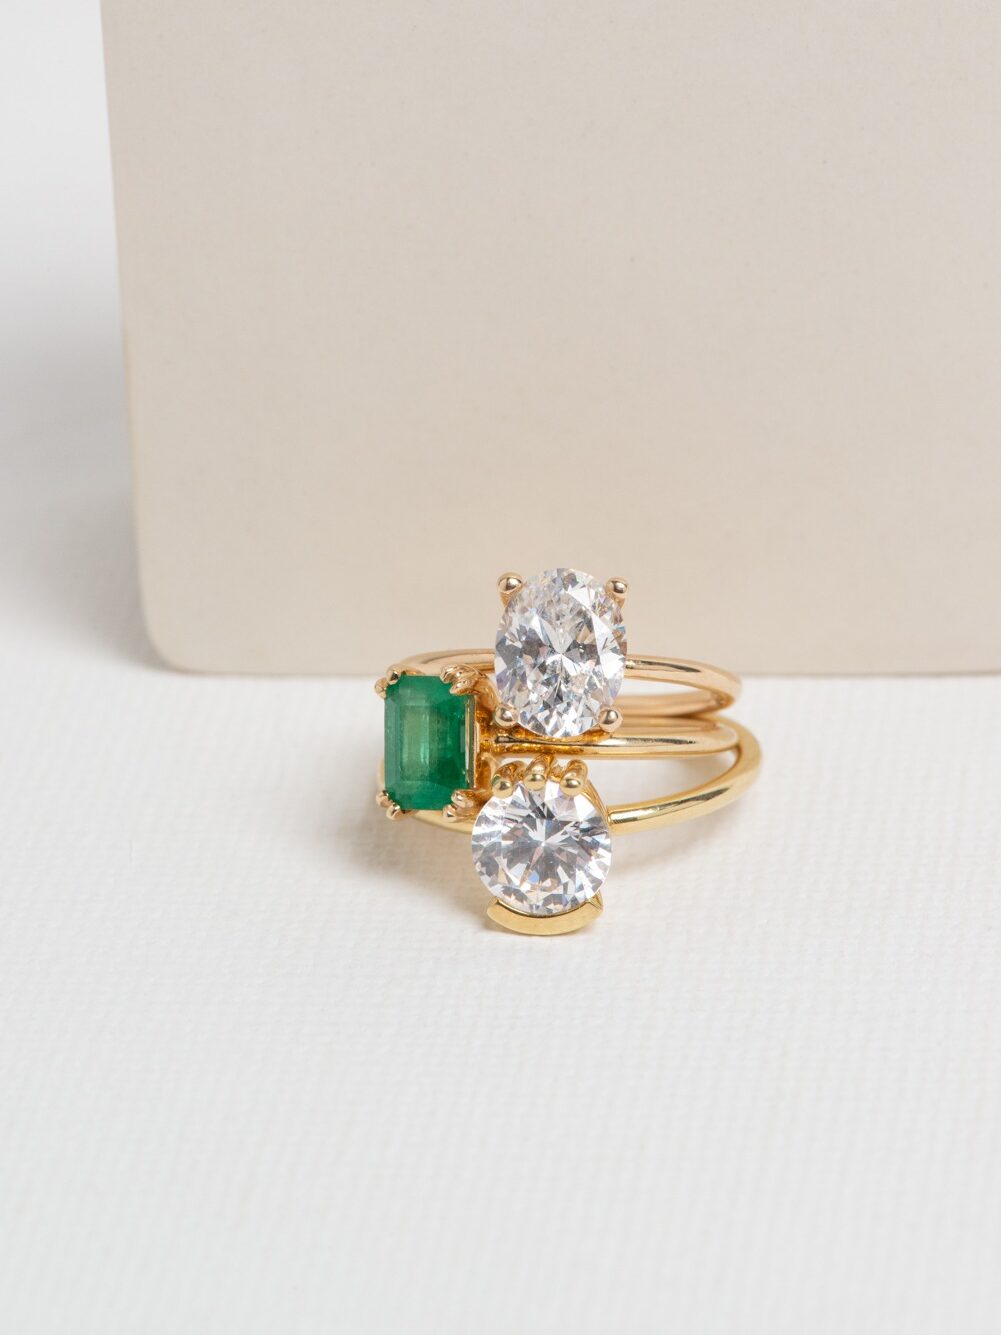 Bario Neal Ethical Engagement Ring